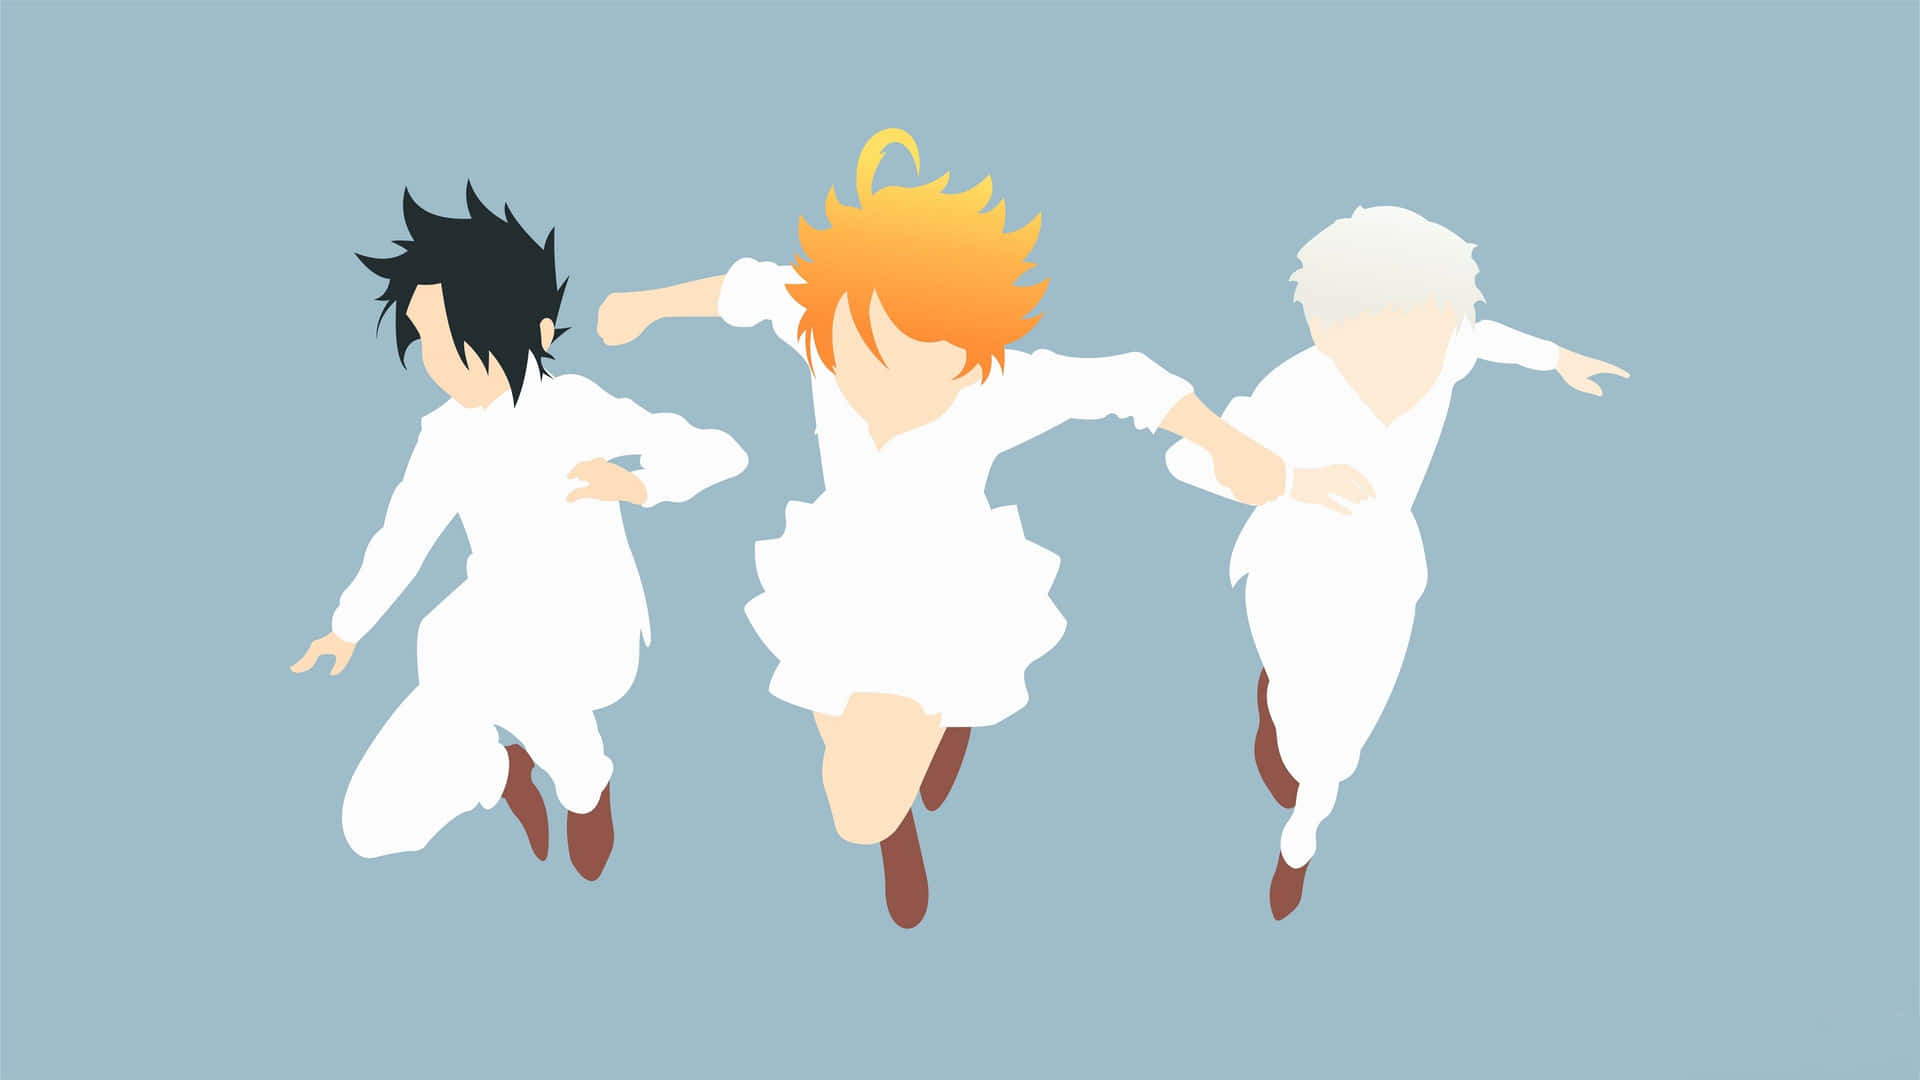 Imagensde The Promised Neverland.